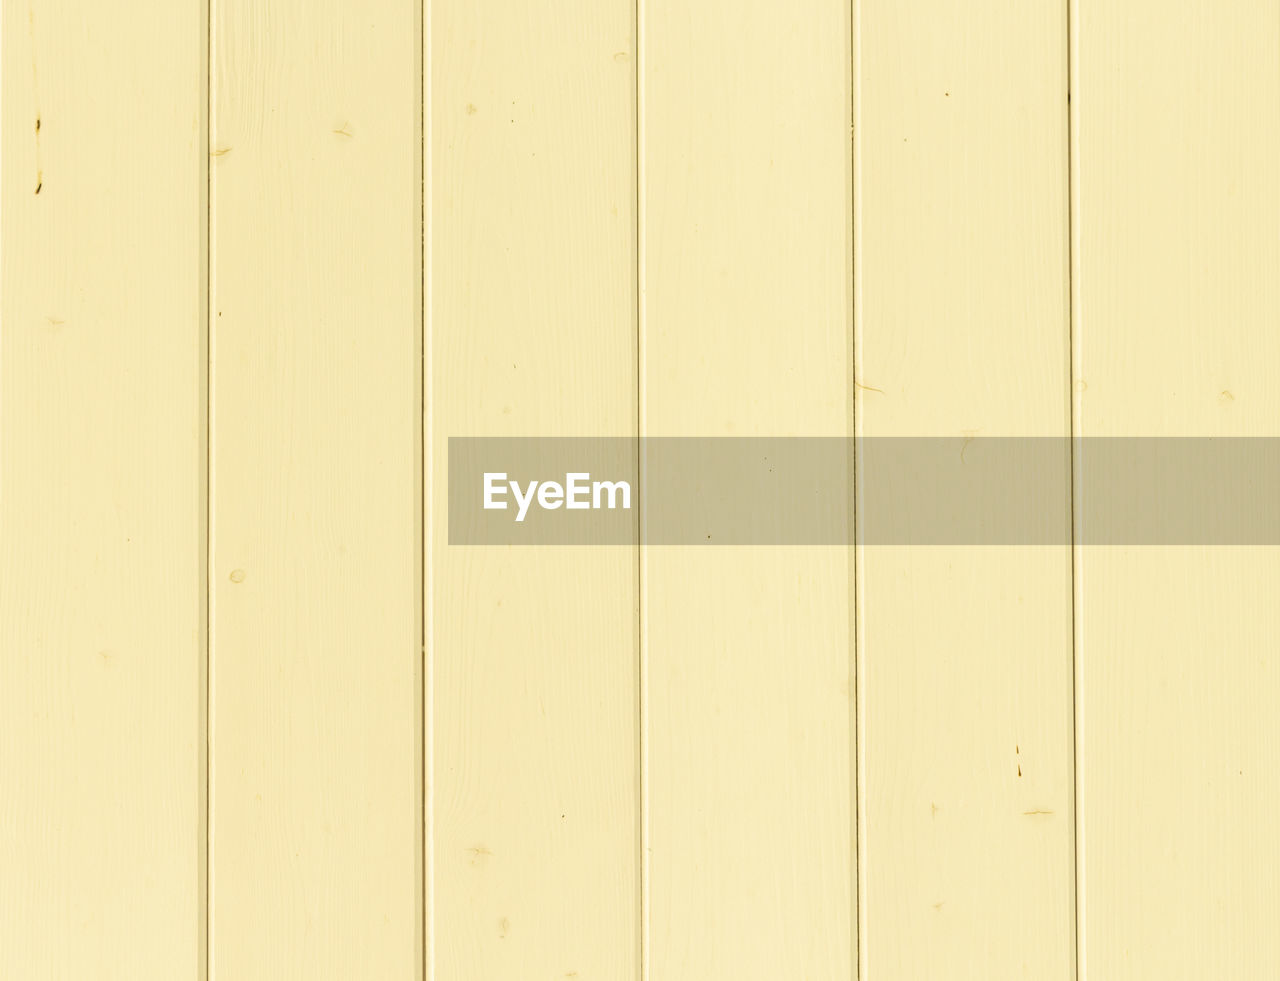 backgrounds, pattern, full frame, yellow, wood, wall - building feature, textured, floor, no people, line, built structure, wall, architecture, copy space, flooring, striped, plank, close-up, in a row, repetition, tile, outdoors, wood stain, abstract